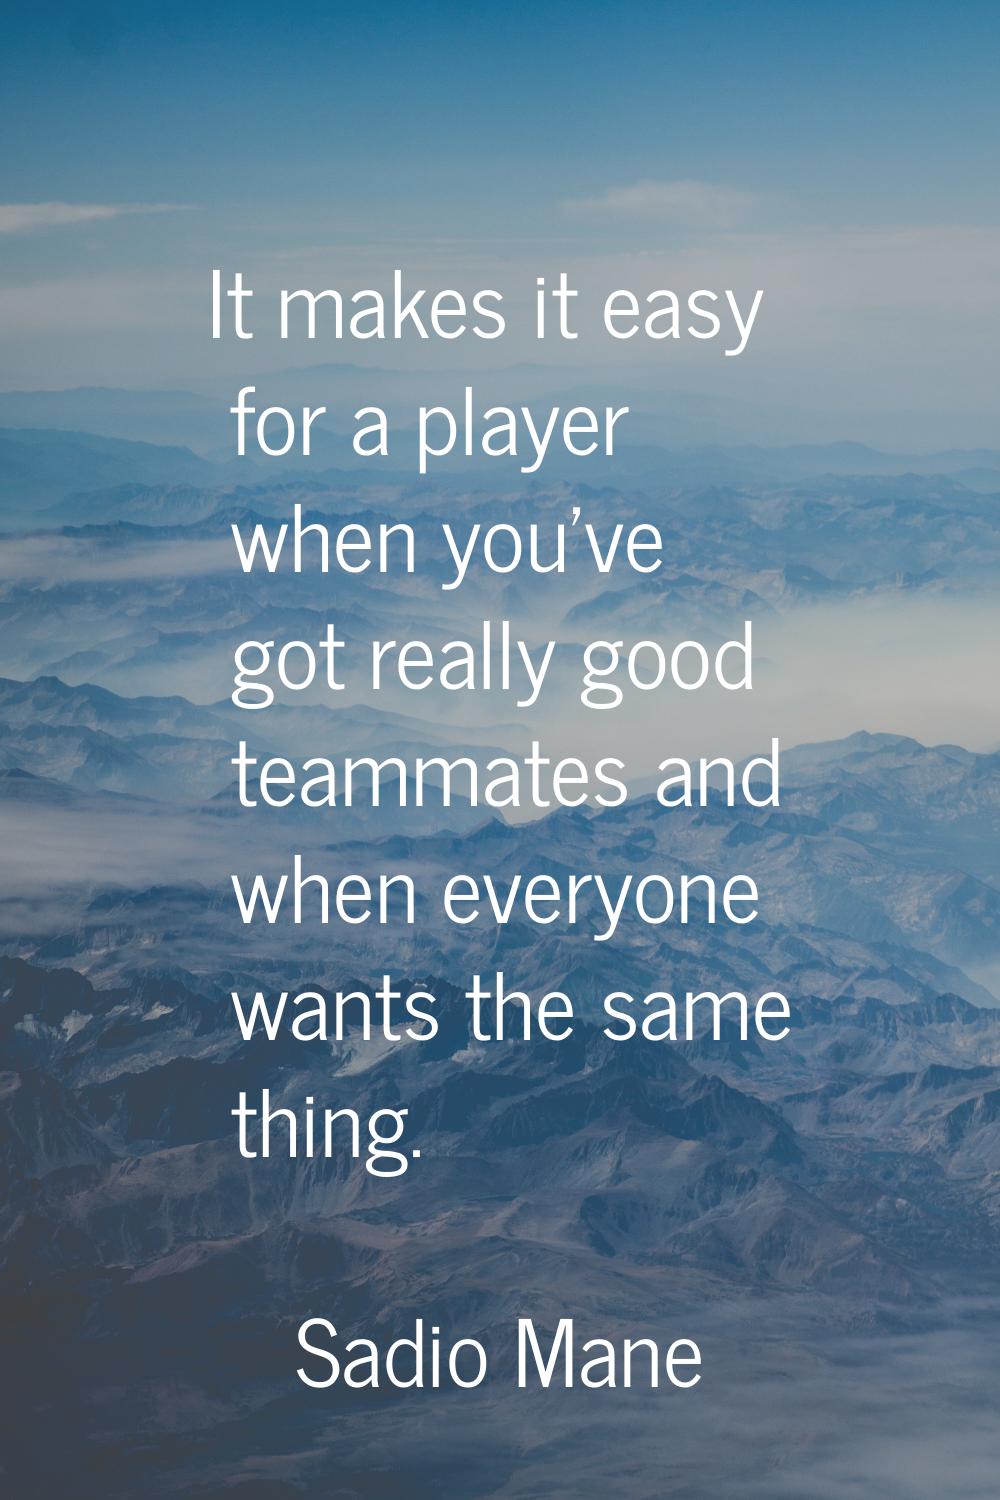 It makes it easy for a player when you've got really good teammates and when everyone wants the sam